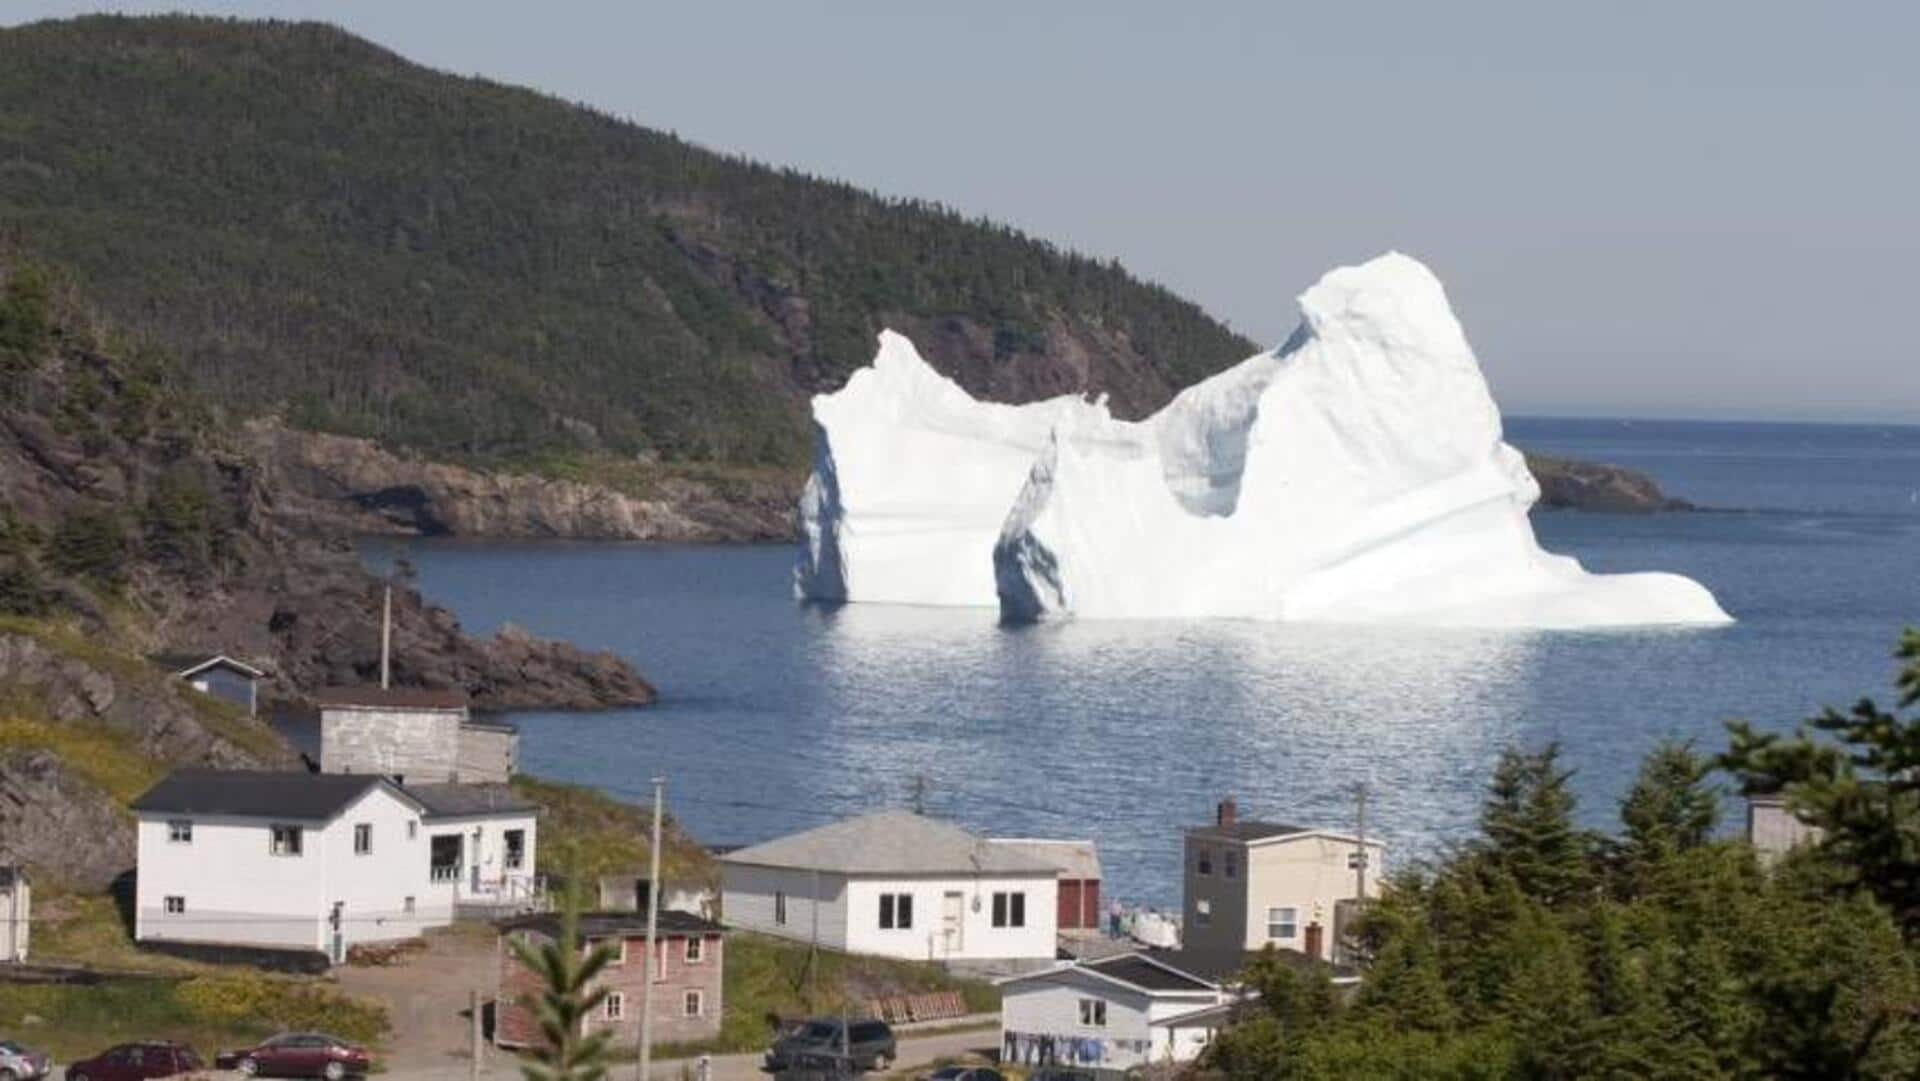 Head over to the majestic icebergs of Newfoundland, Canada